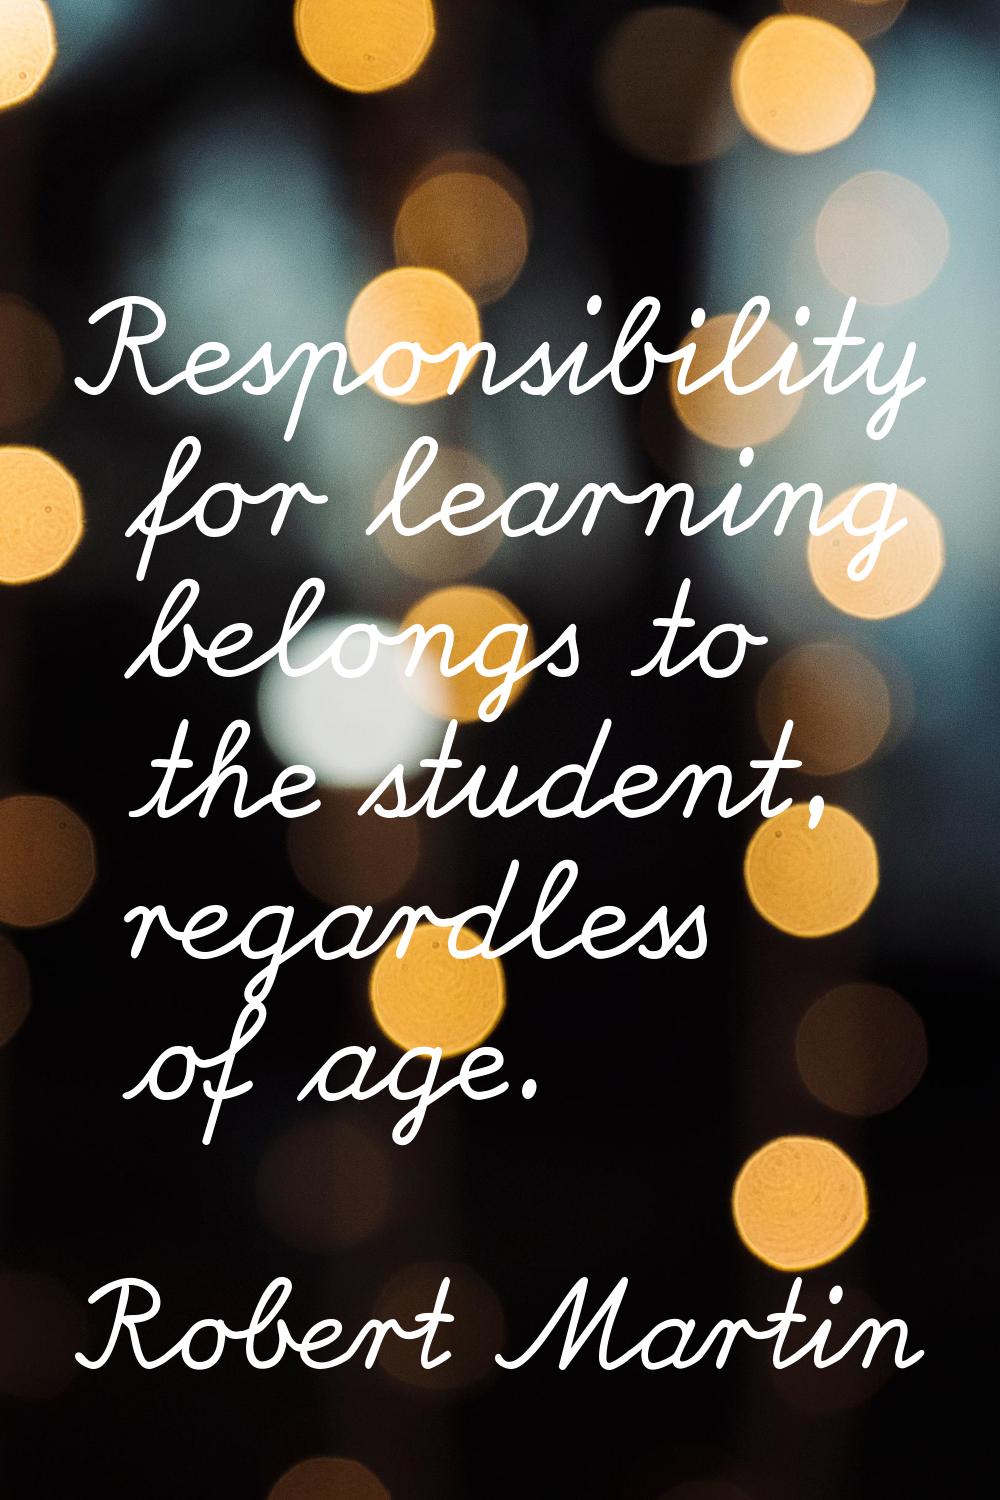 Responsibility for learning belongs to the student, regardless of age.